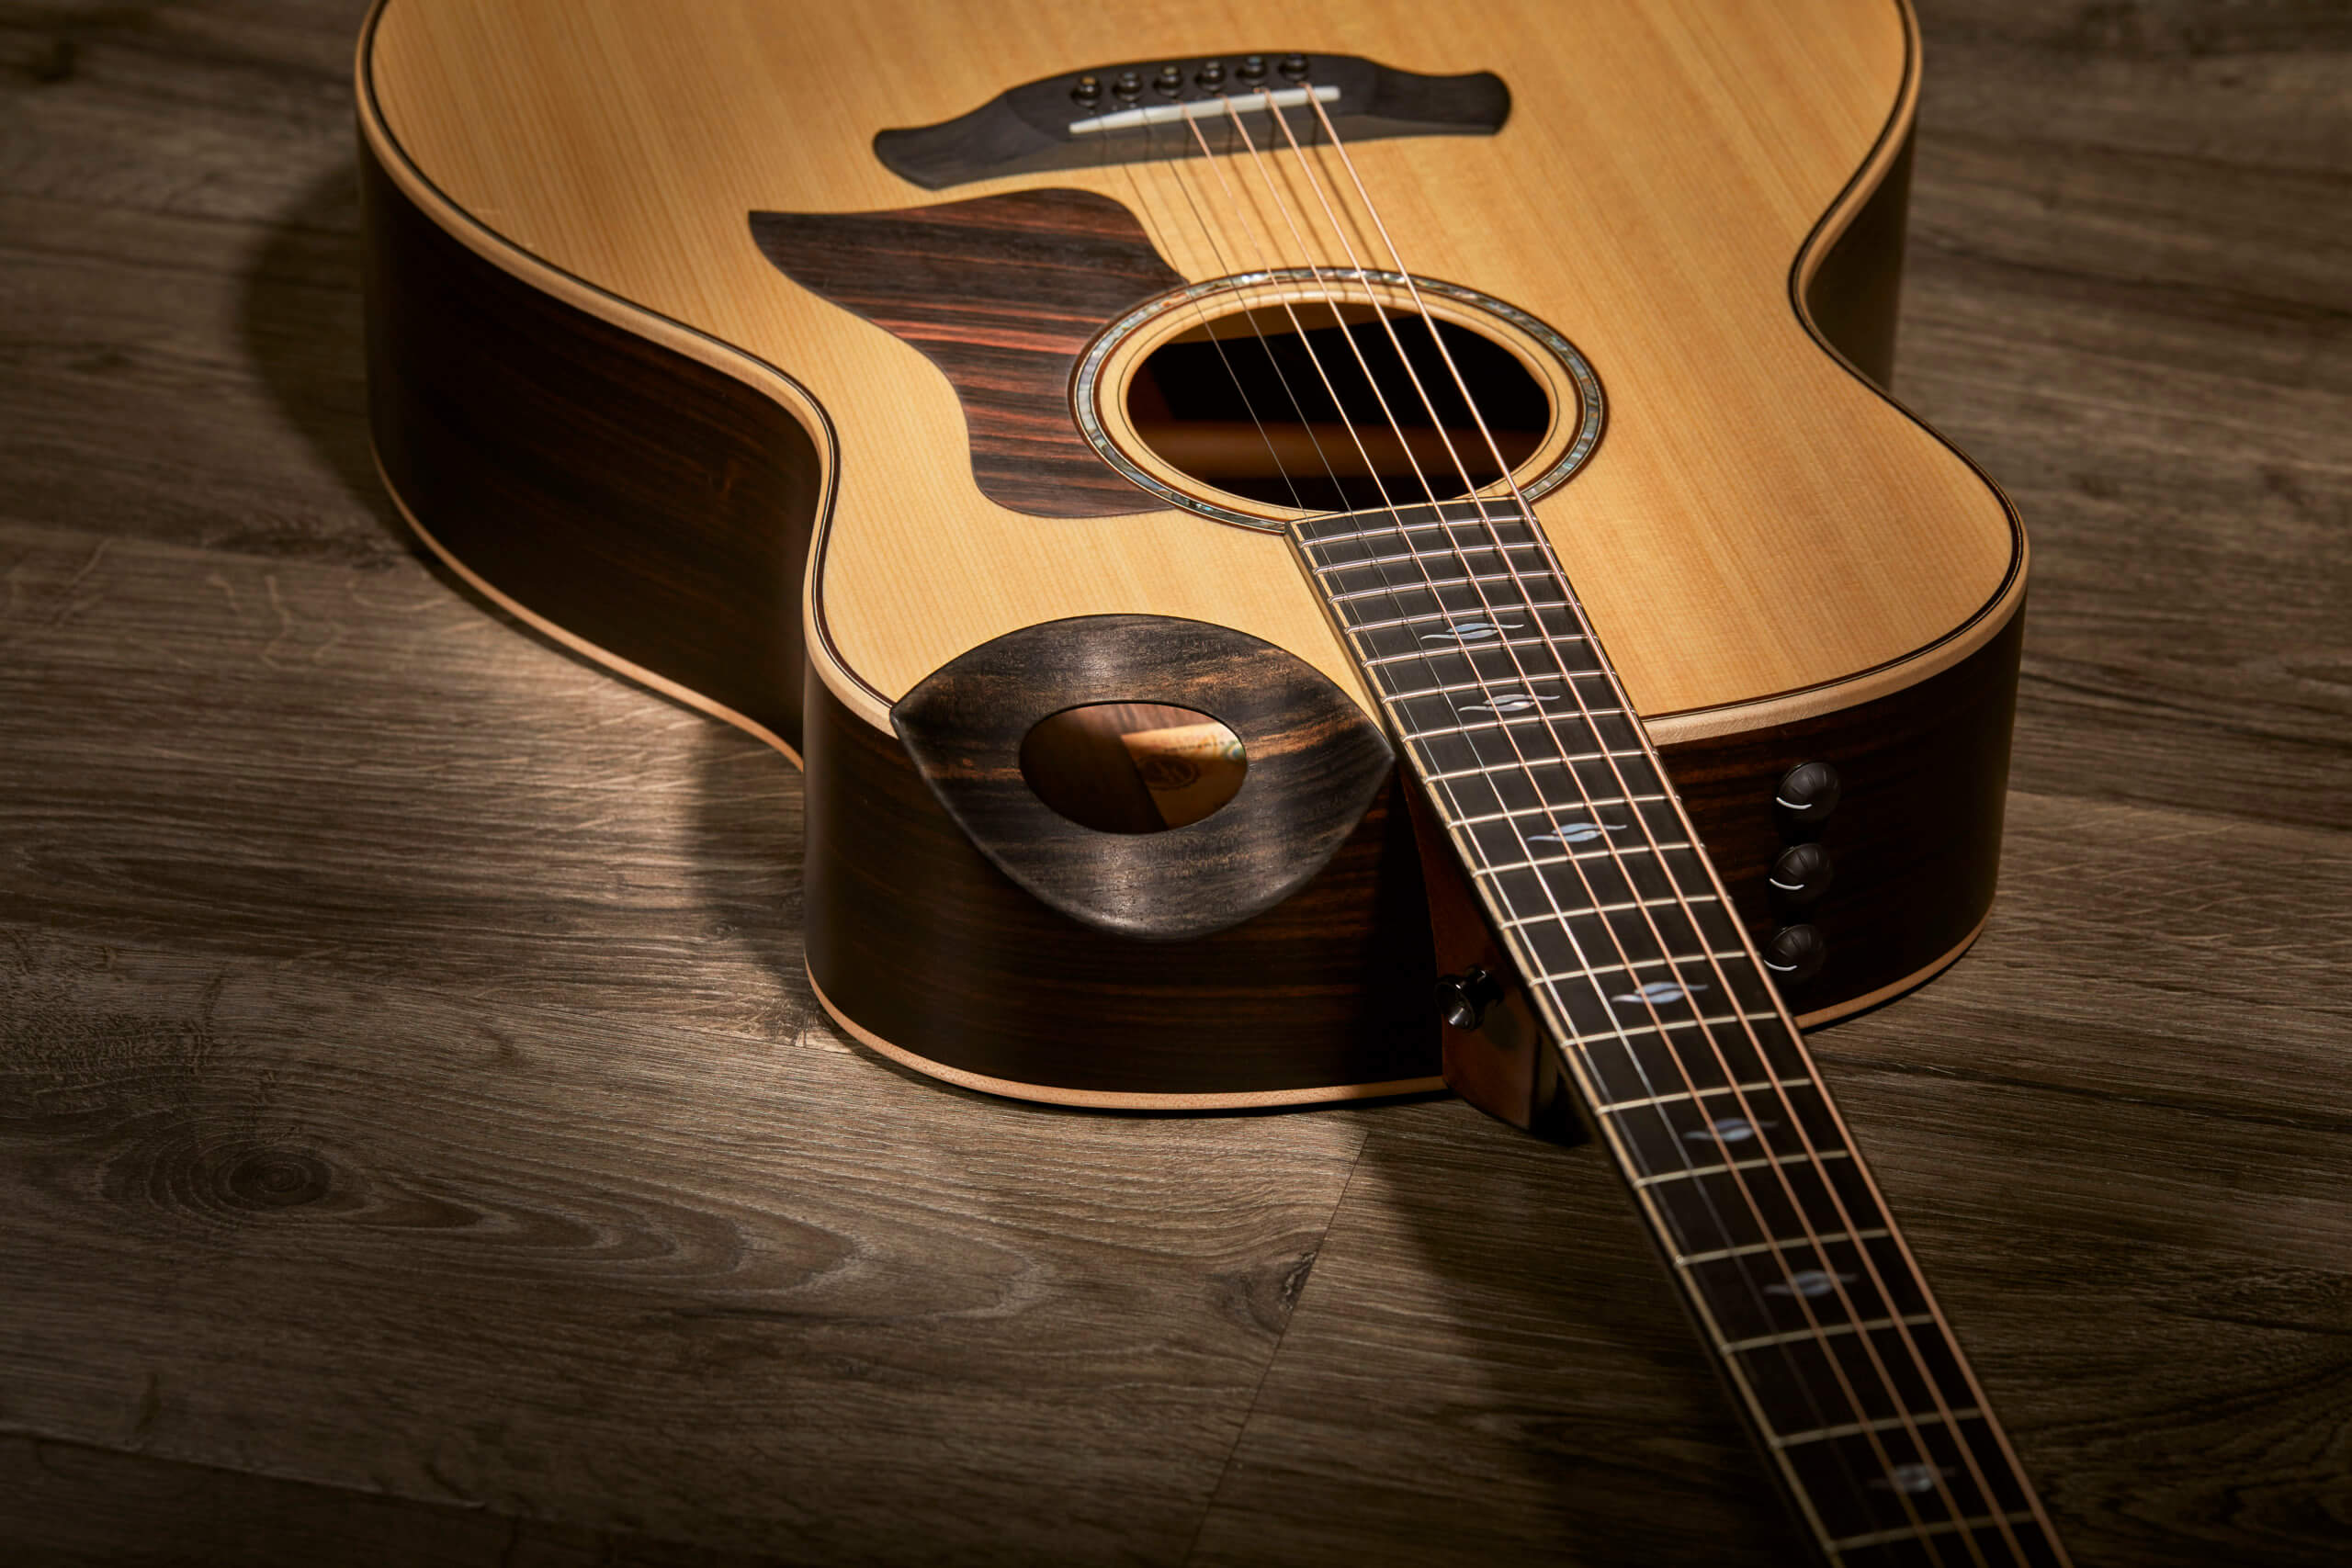 NAMM 2020: Taylor expands its Builder's Edition collection with